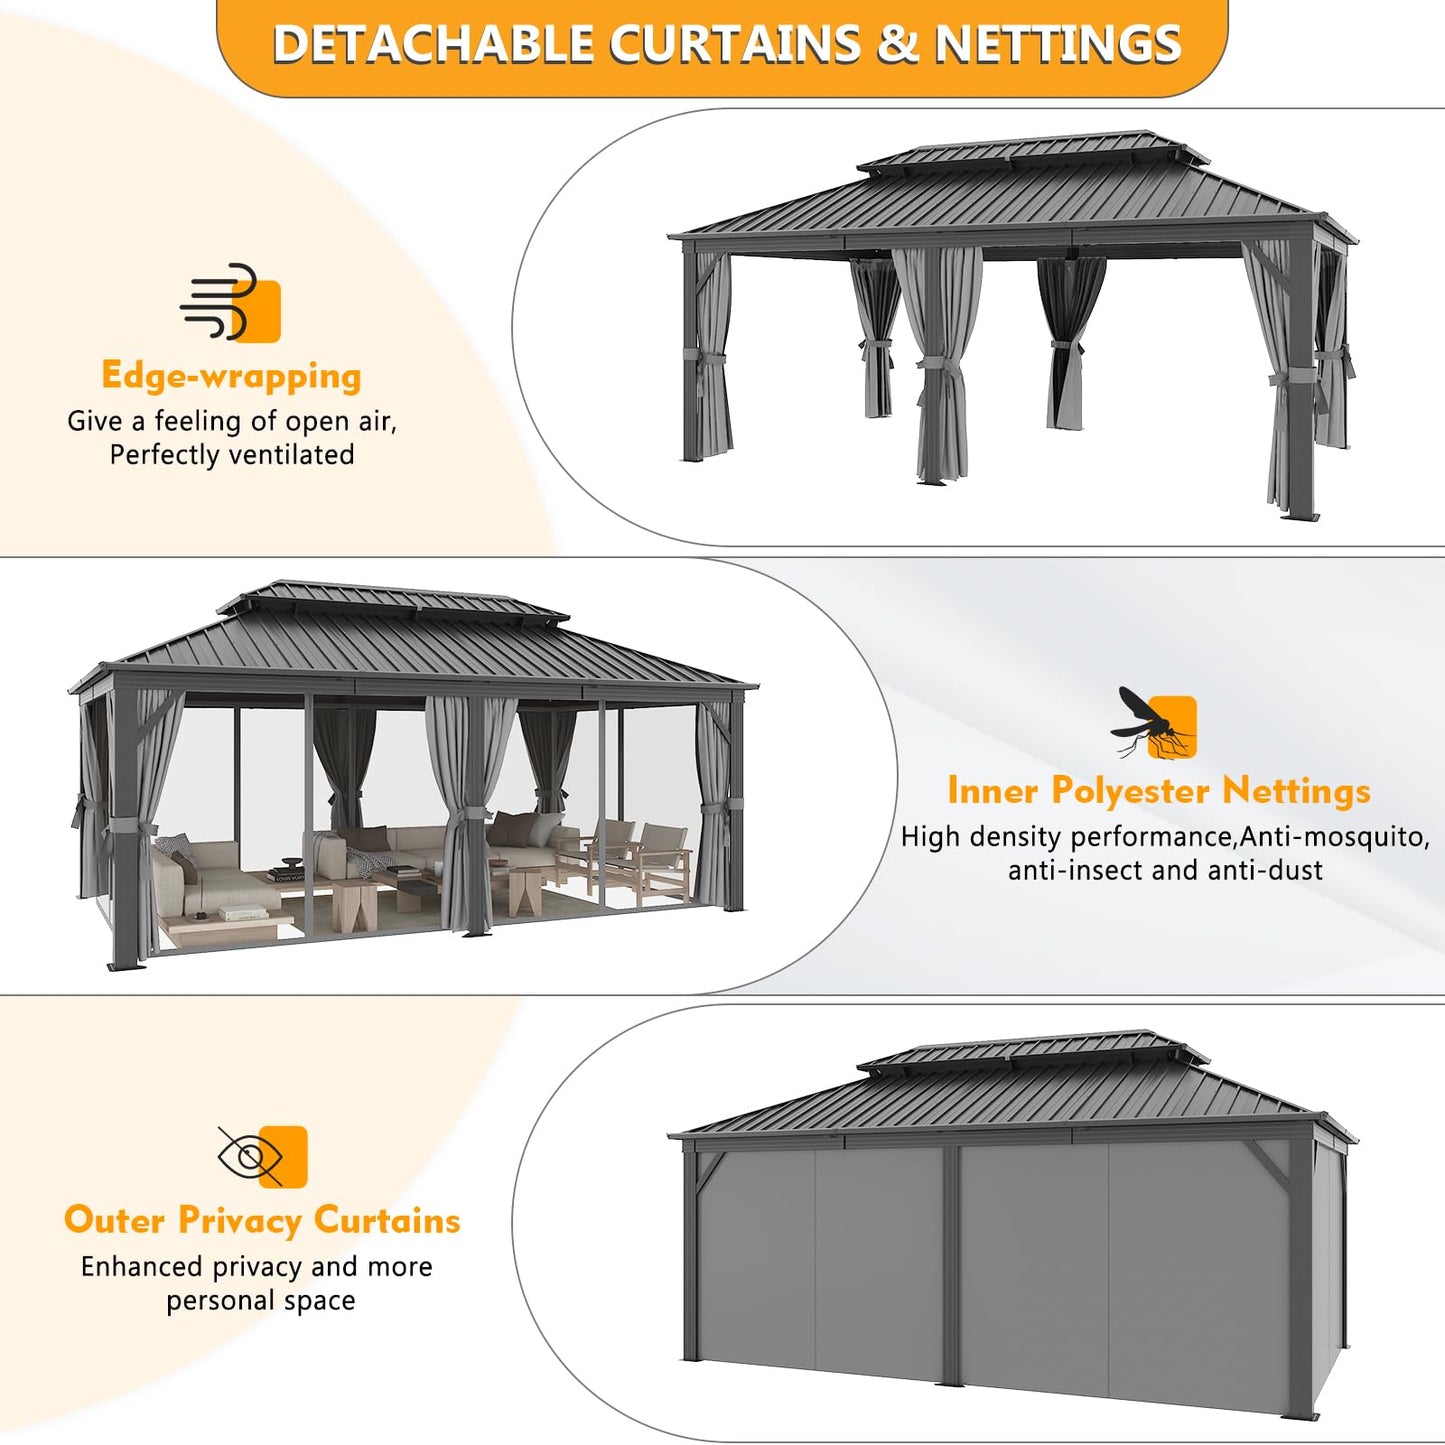 Jolydale 12FT X 20FT Hardtop Gazebo, Galvanized Steel Dual-Layer Top, Aluminum Metal Gazebo with Netting and Curtains, Permanent Gazebo Pavilion for